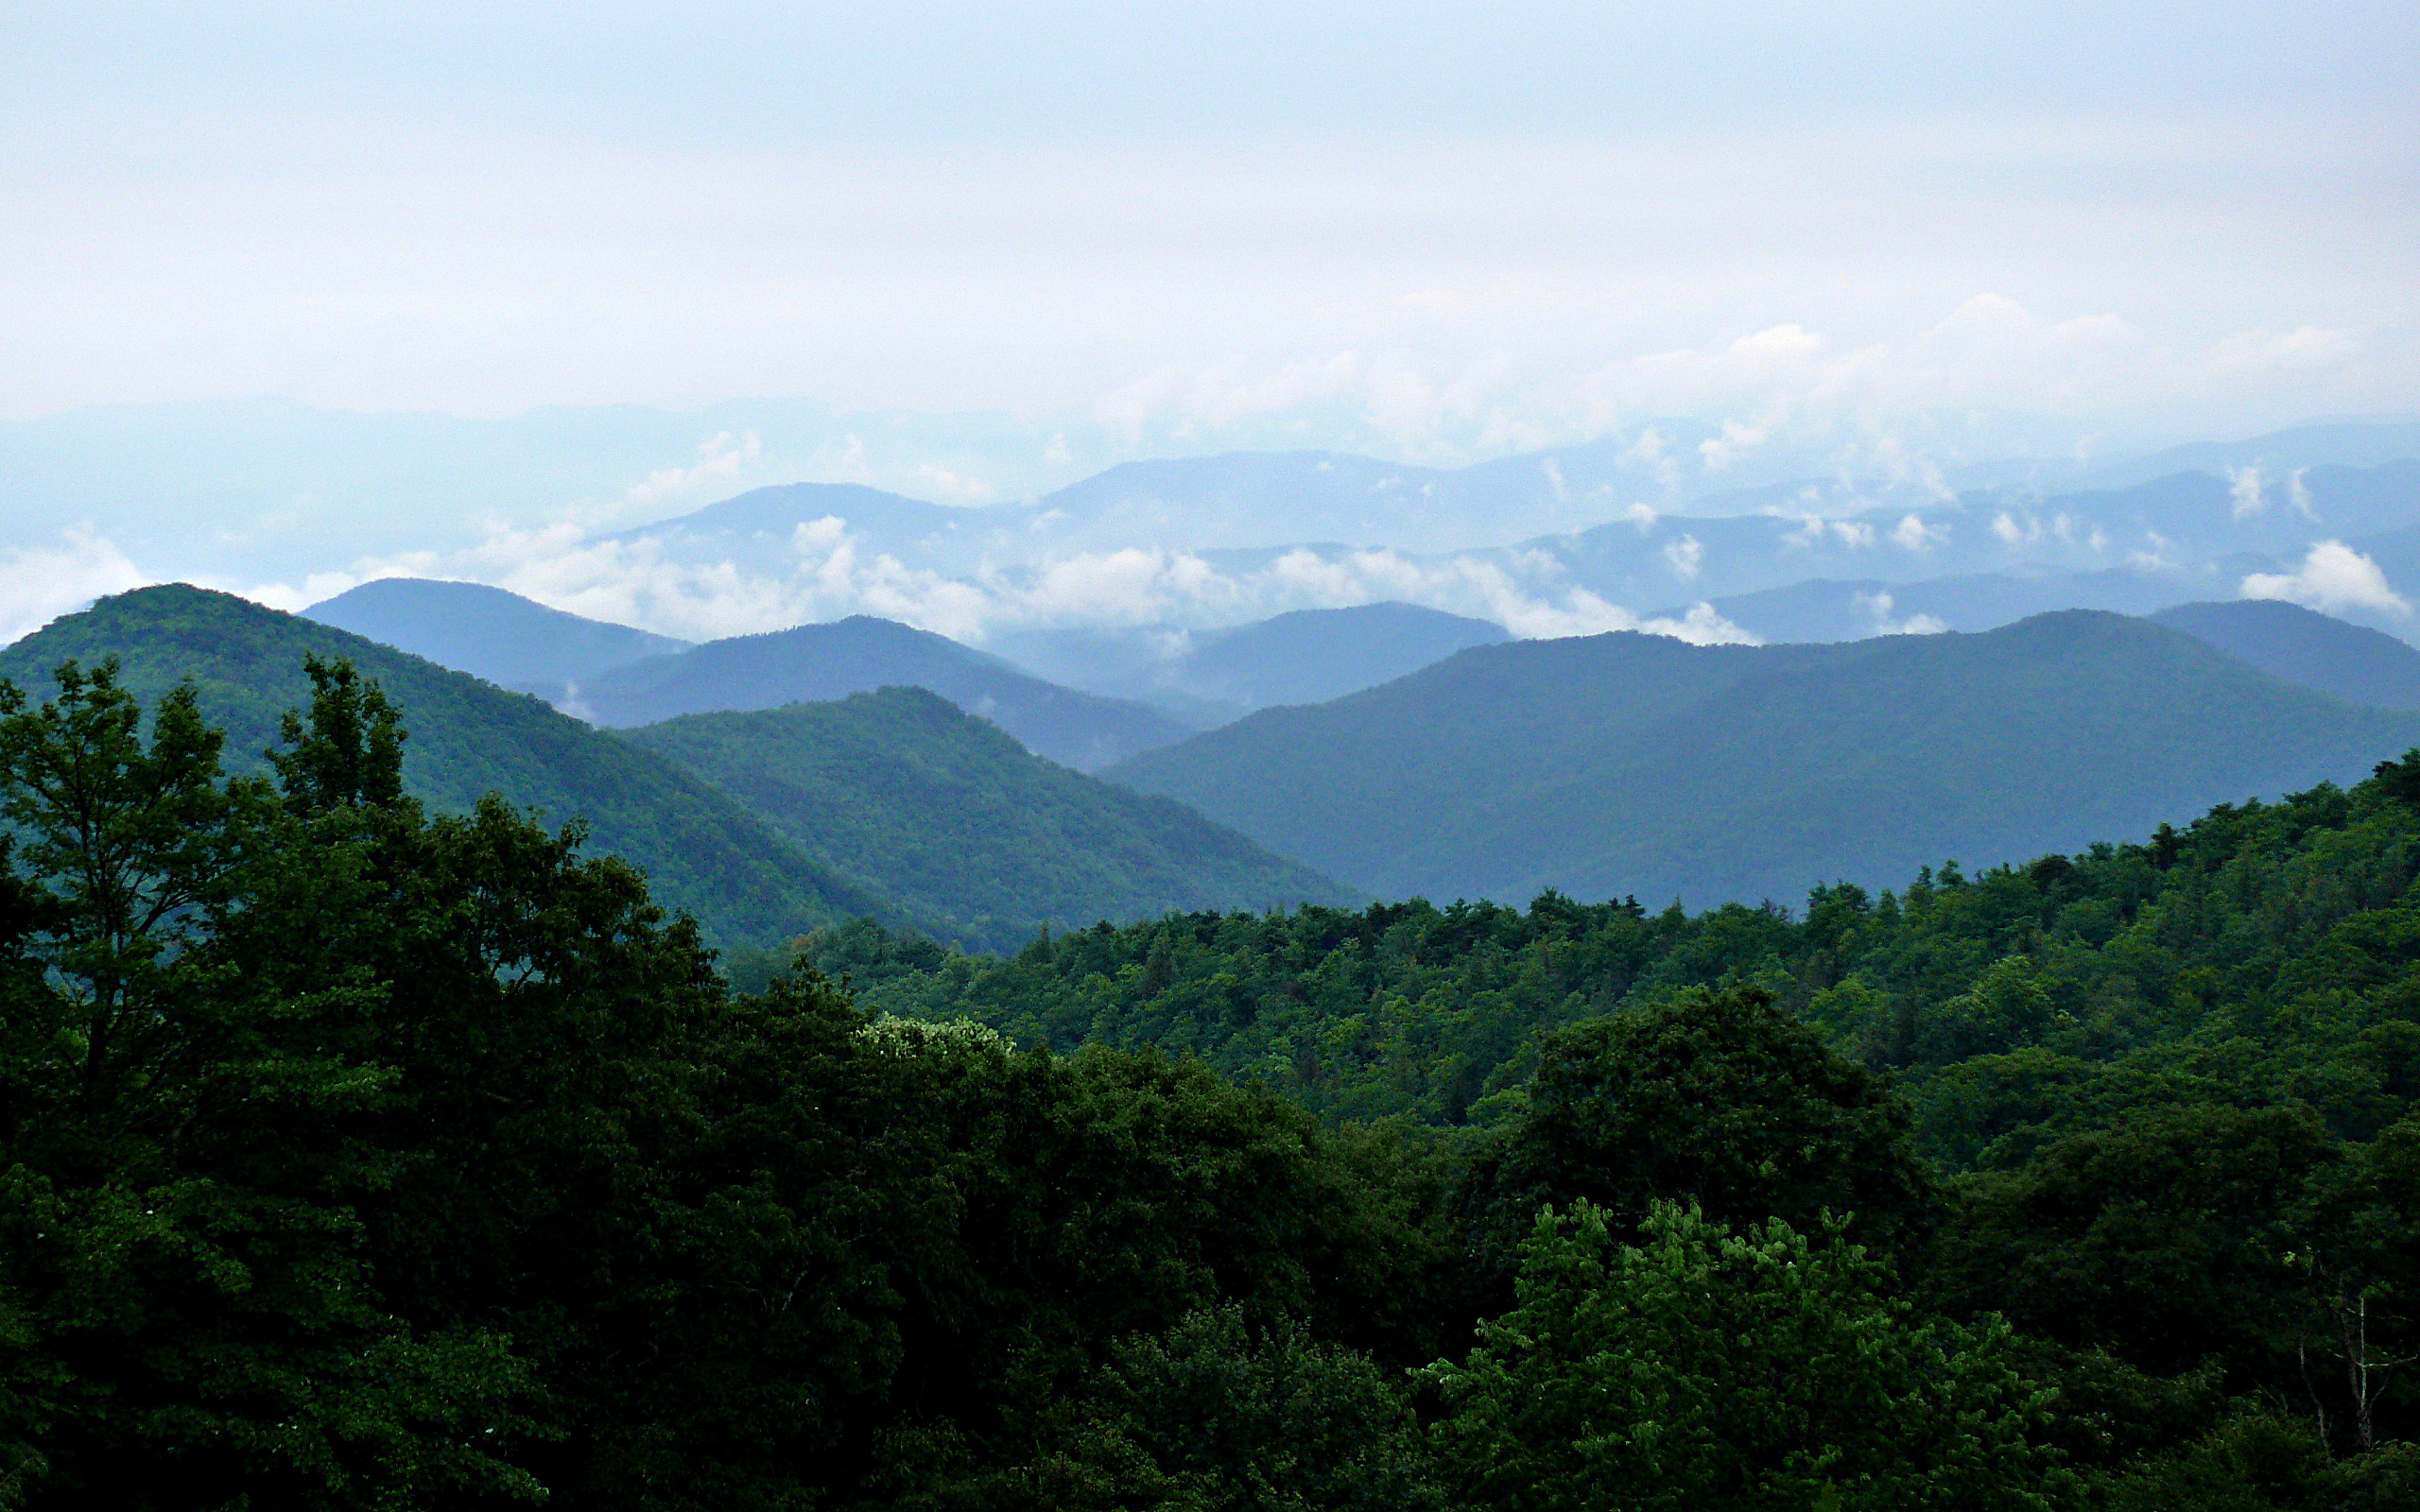 The Blue Ridge Mountains form part of the mystique around the Appalachian region.